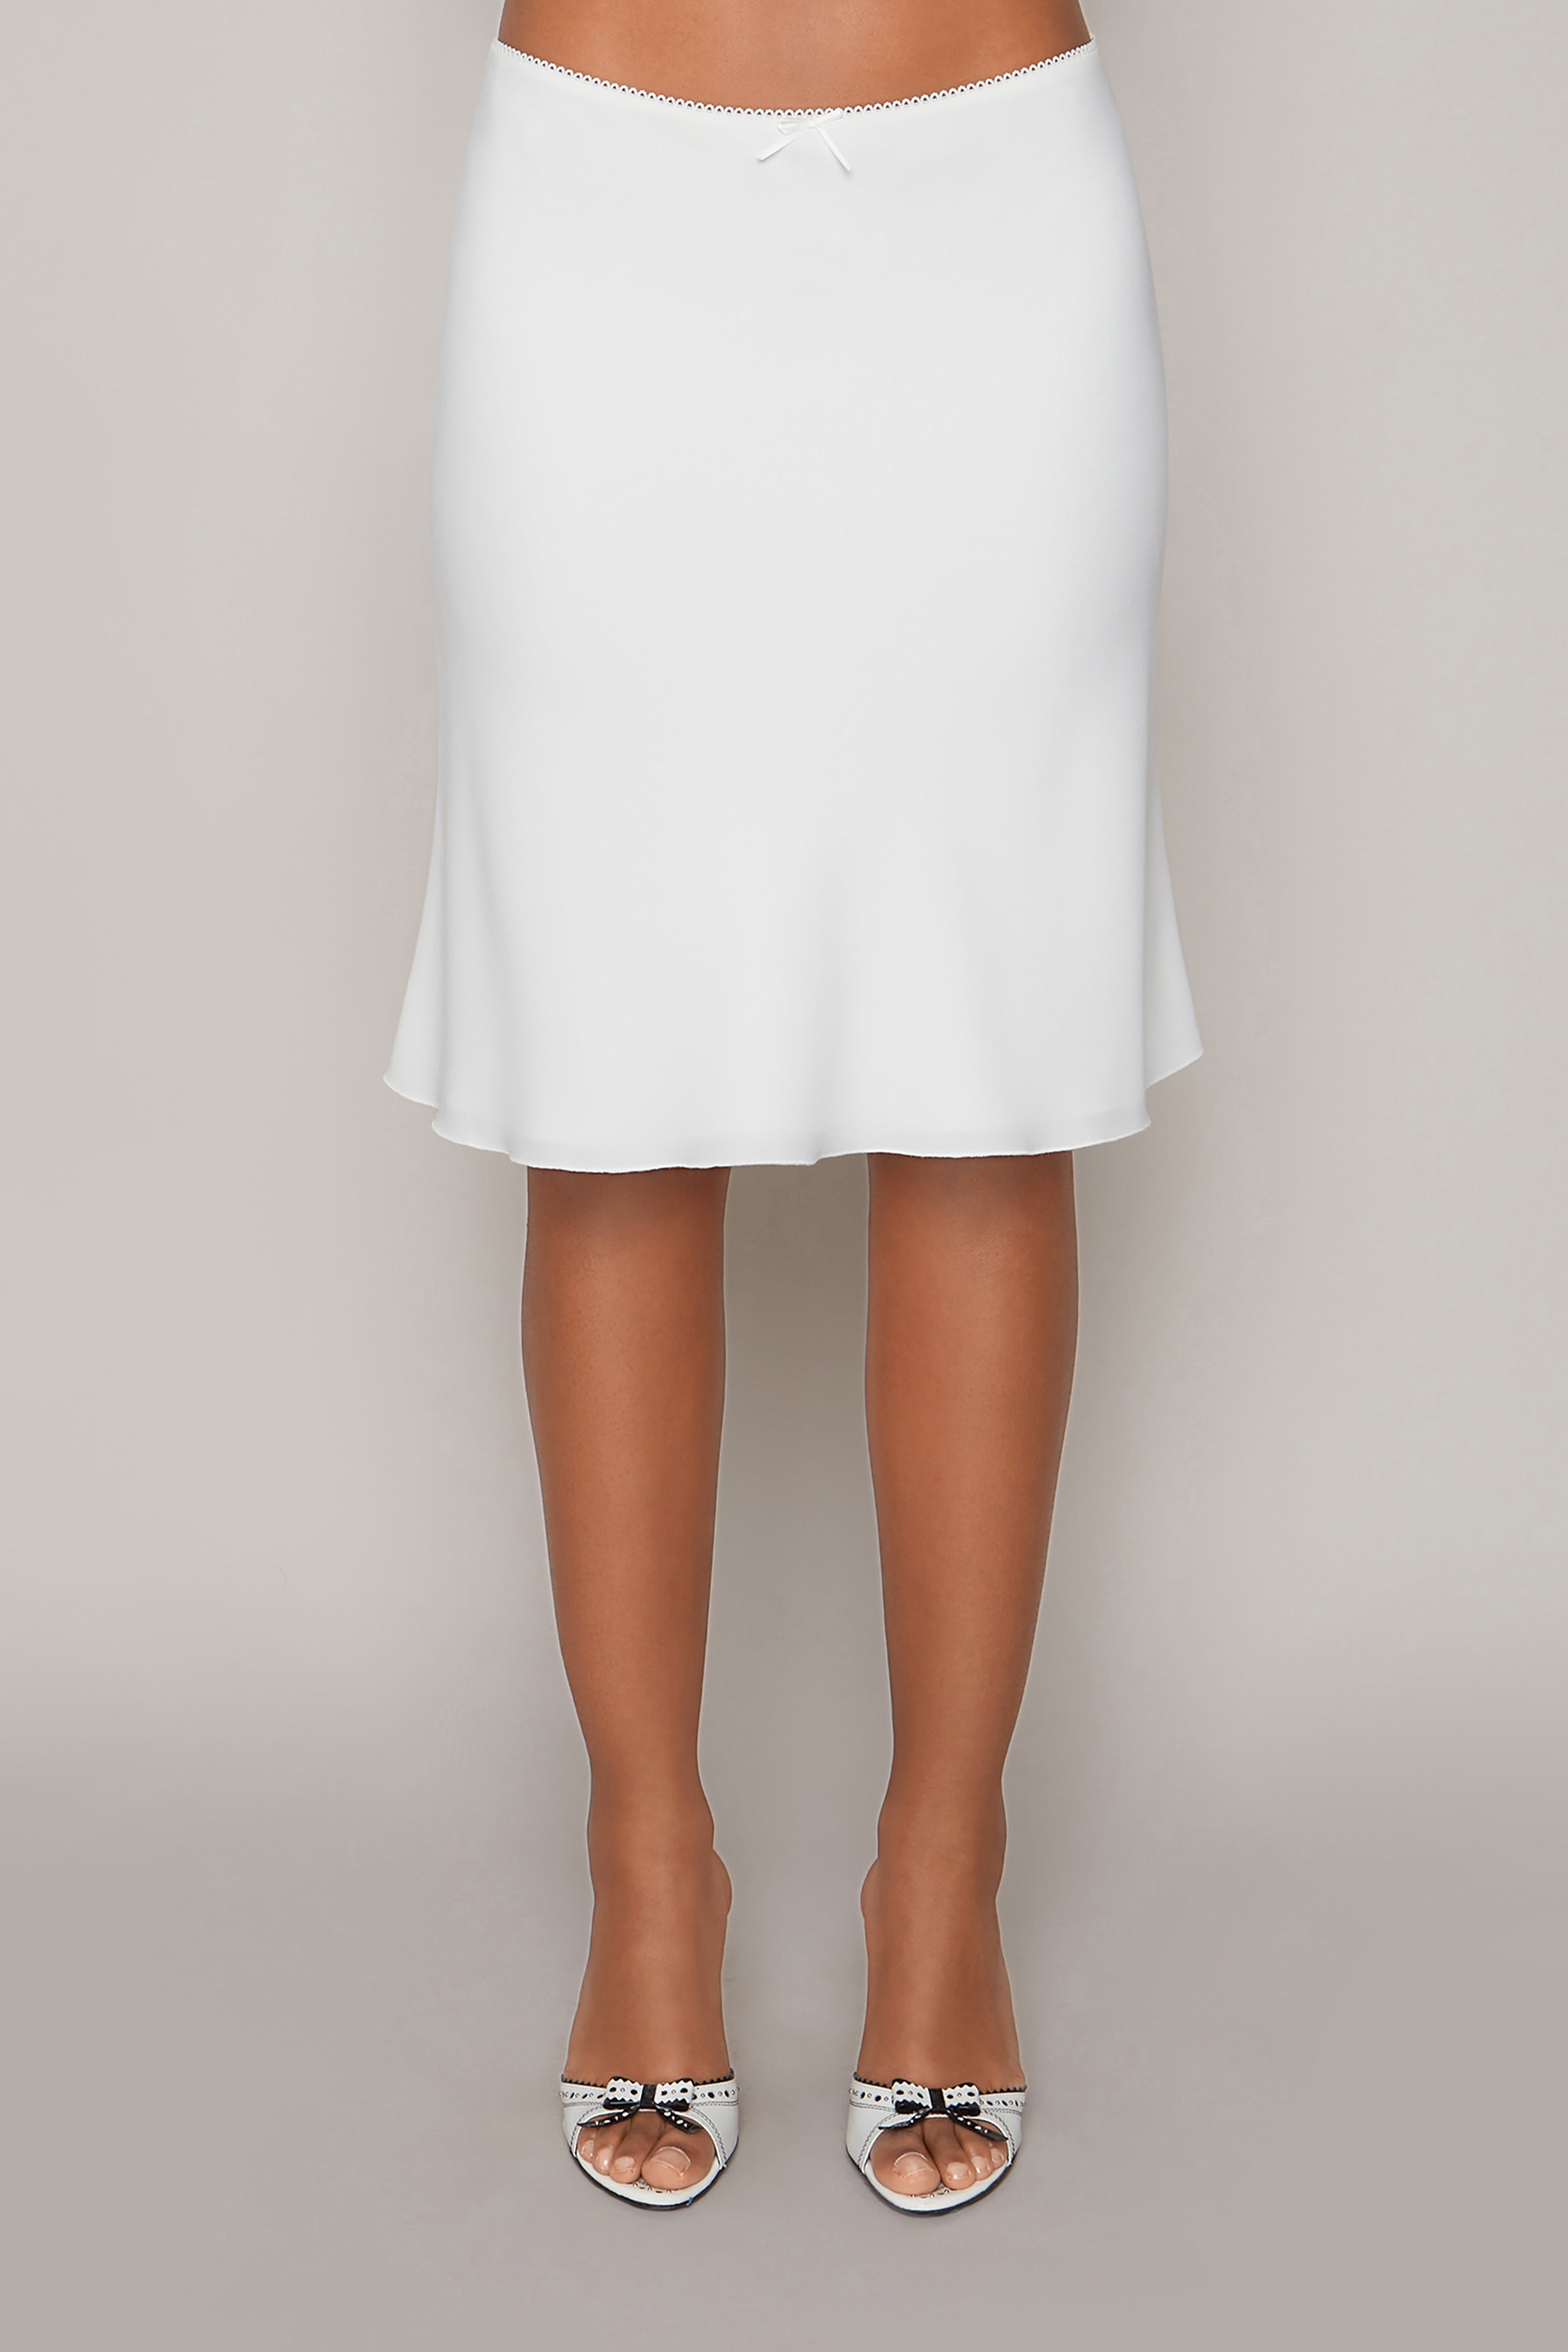 Paloma Lace Skirt in White